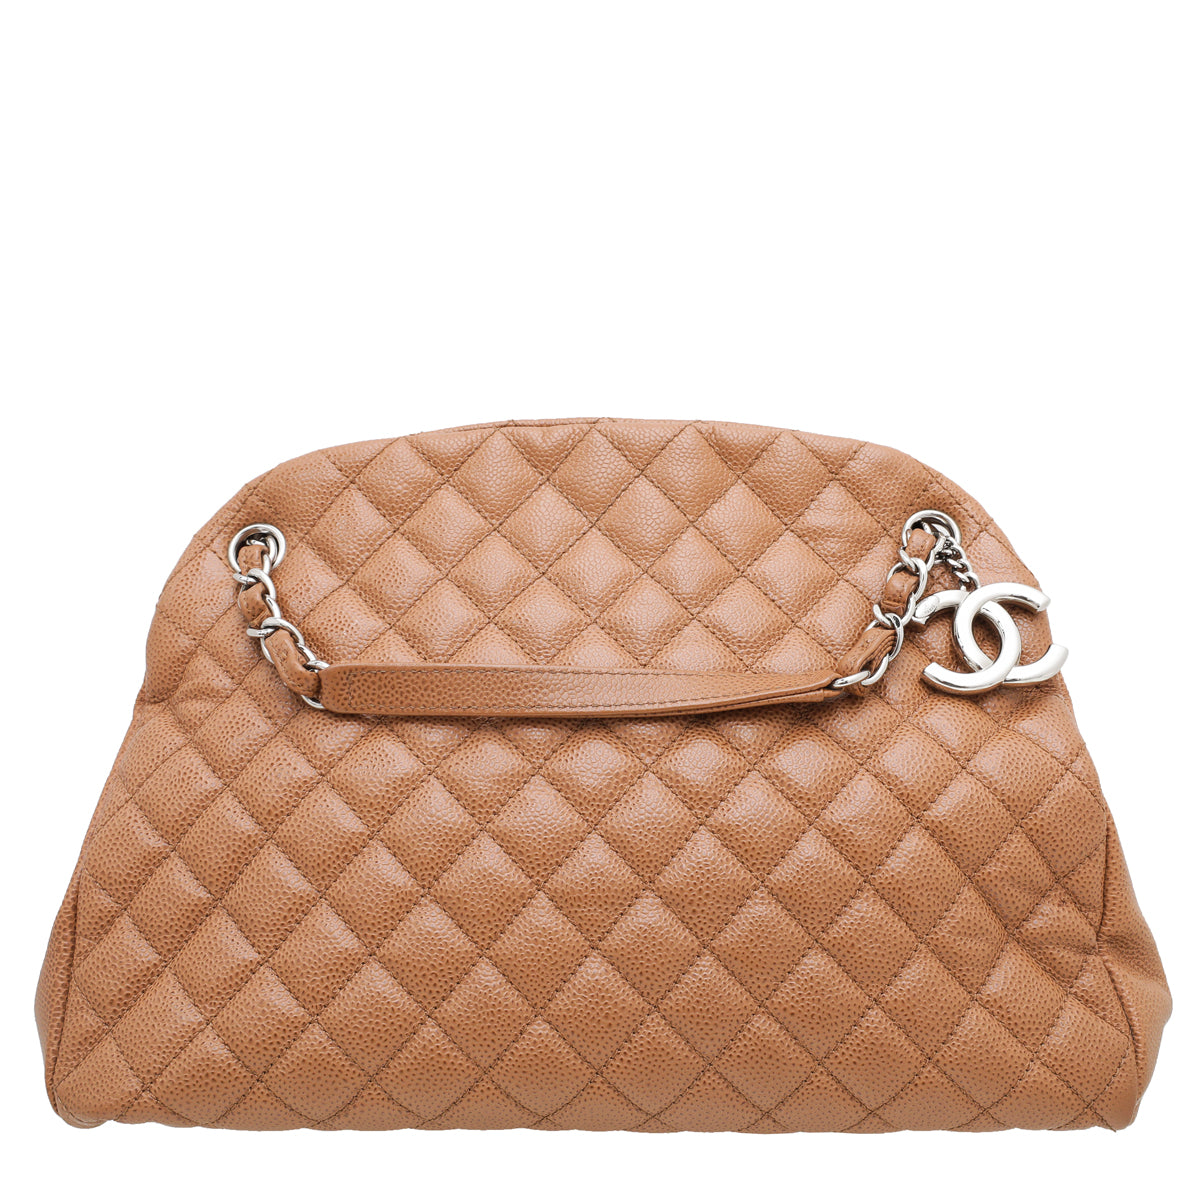 Chanel Brown Just Mademoiselle Bowling Bag